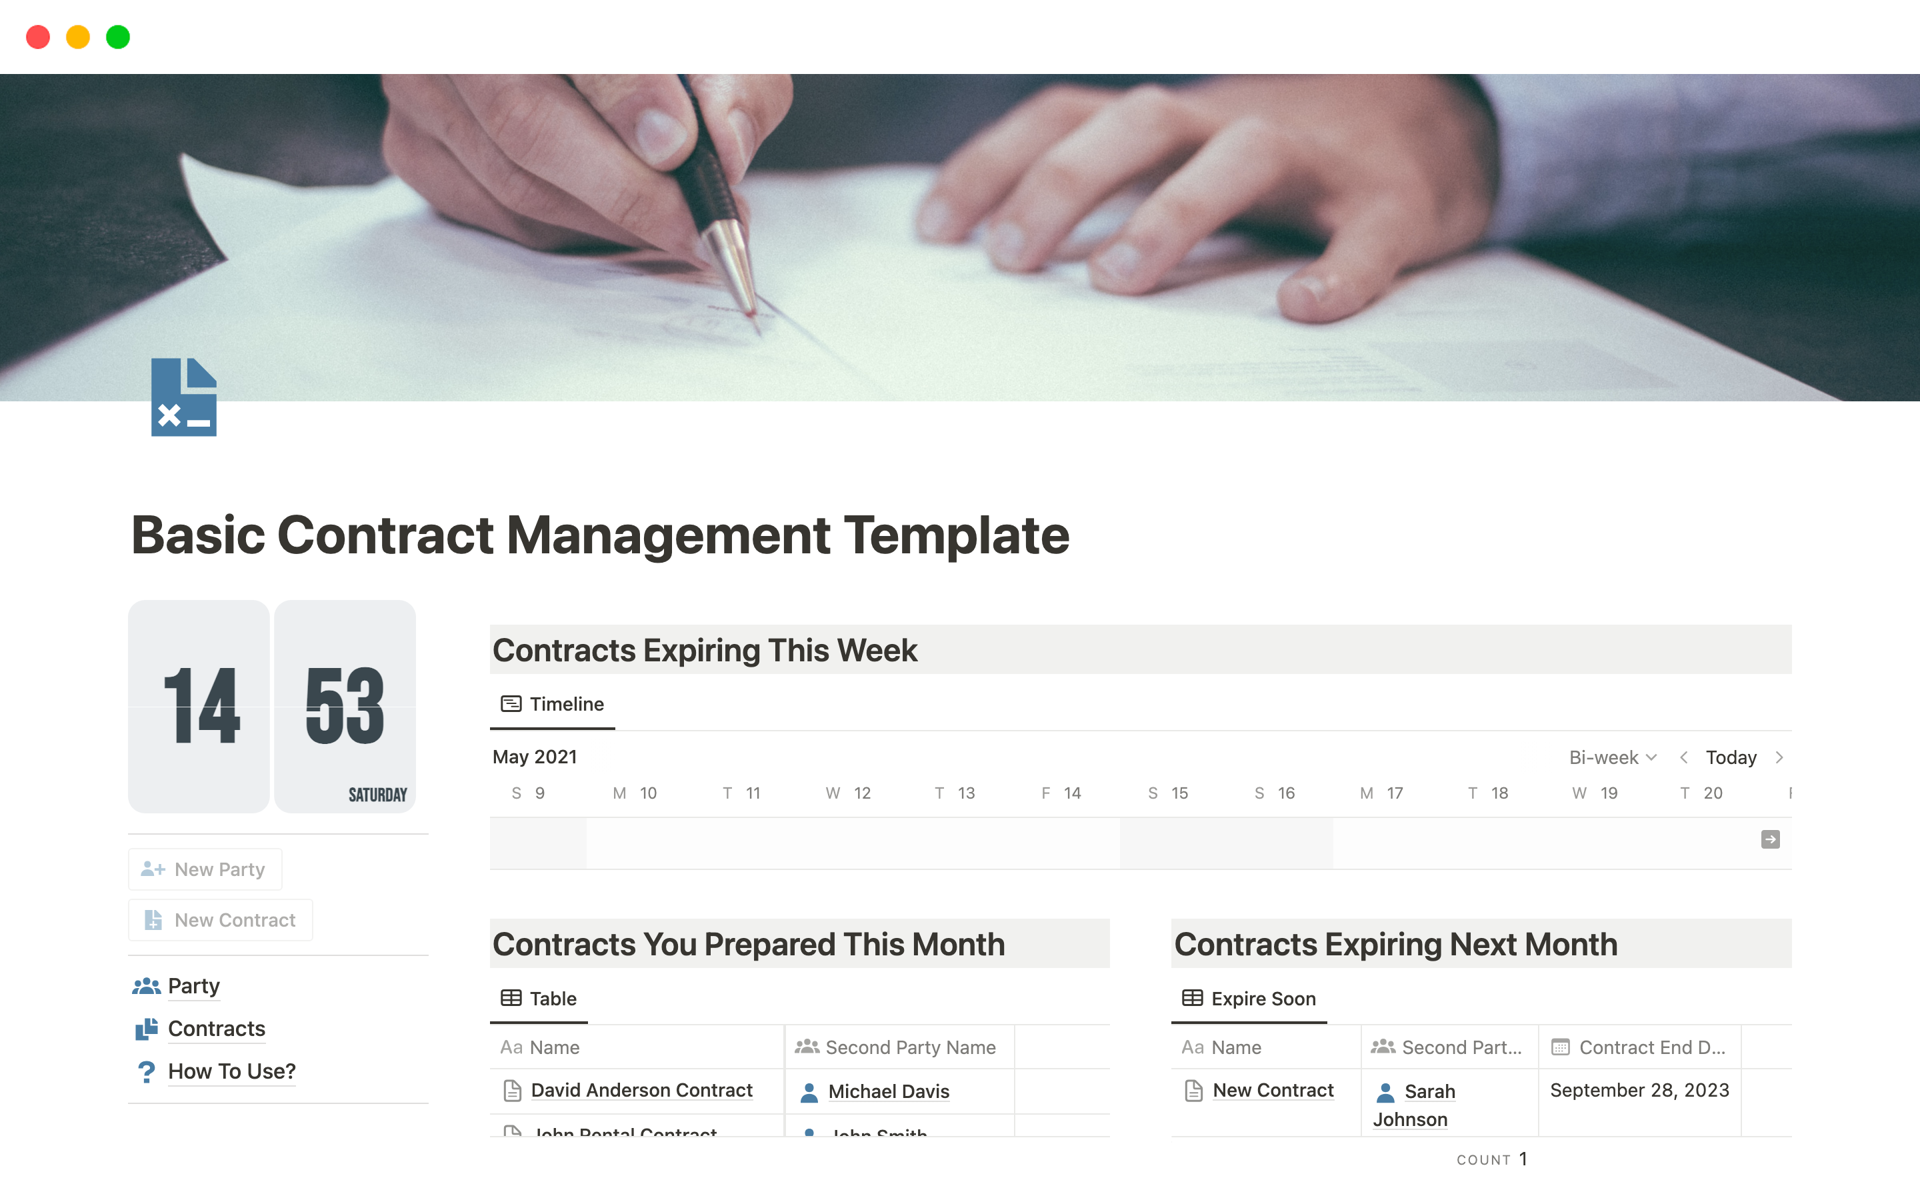 Manage your contracts easily with template! Add parties, press a button, and voila – your contract draft is ready. Create, manage, and simplify!